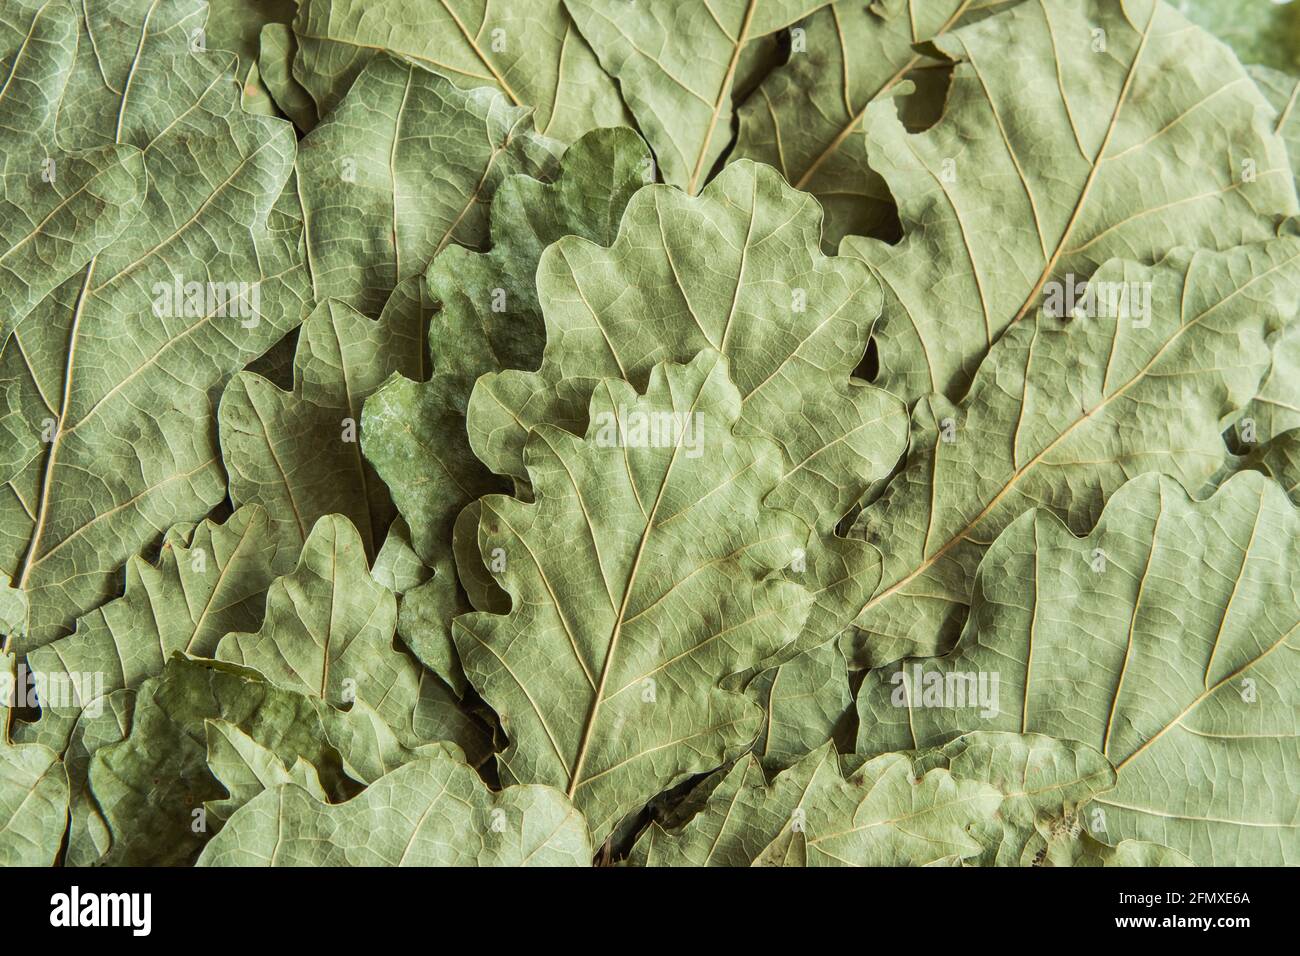 Dry pale green oak leaves from a bath broom. Background image Stock Photo